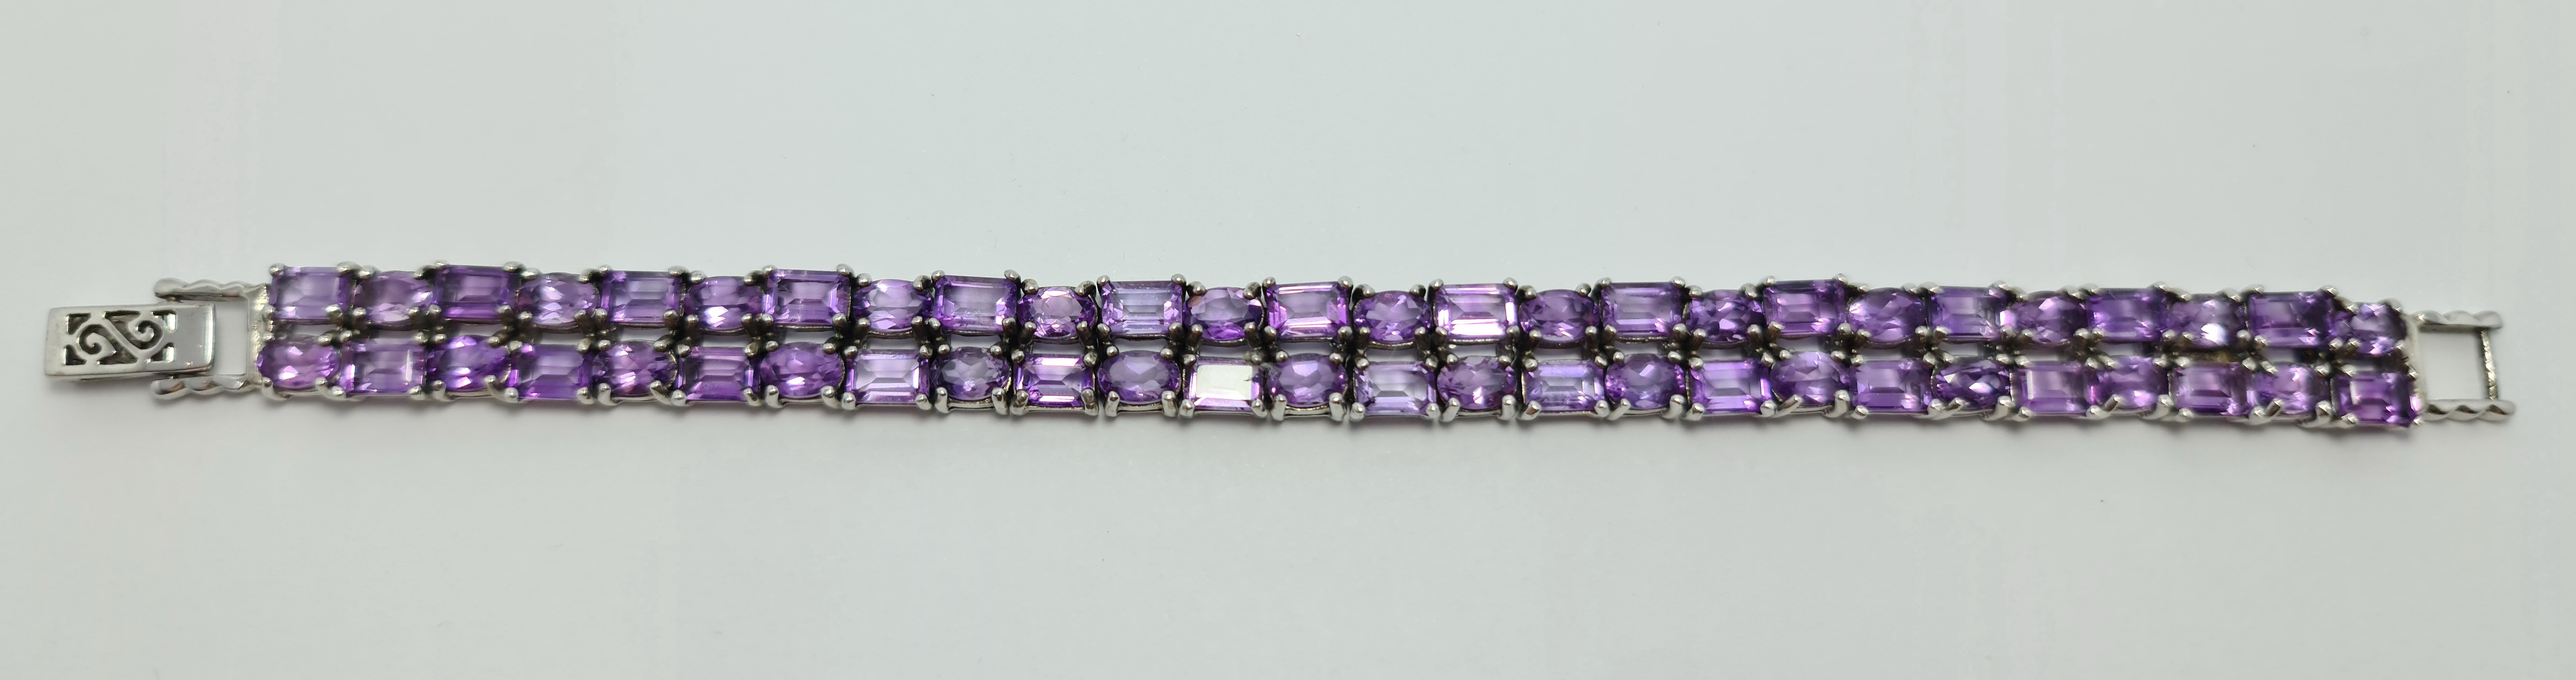 Genuine Brazilian Amethyst Tennis Bracelet set in Pure 925 Sterling Silver with Rhodium Plating

Carat weight: 19 carats
Total bracelet weight: 33 grams
The Length of the Bracelet is 7 inches